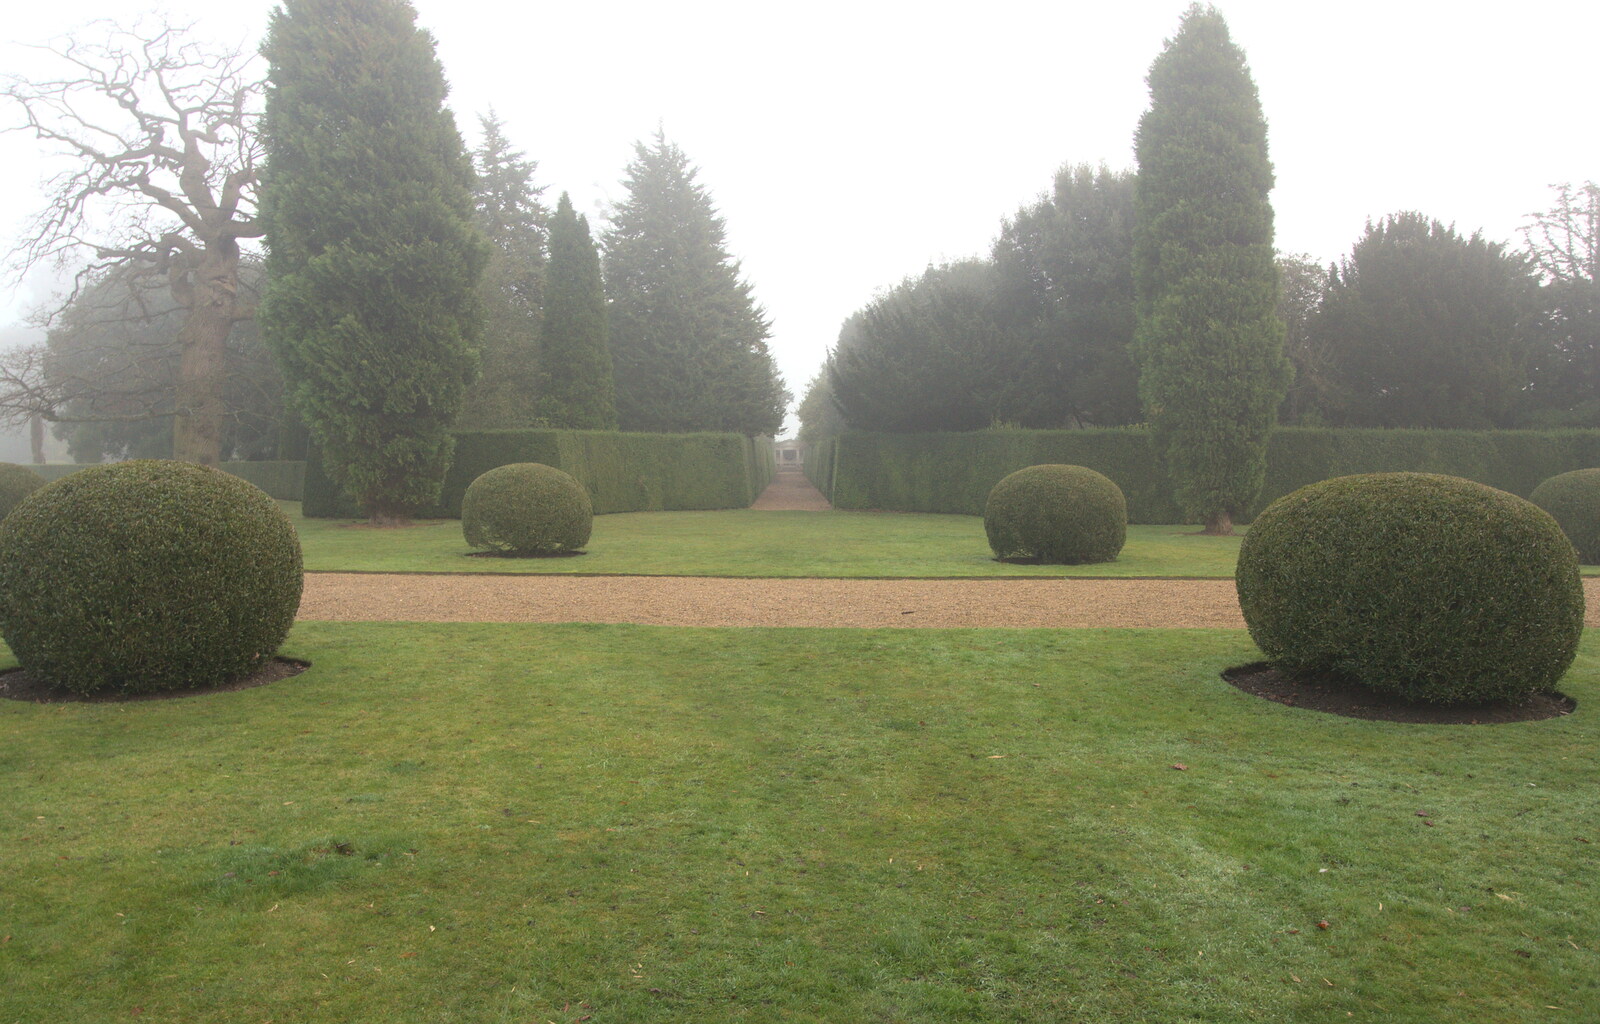 Topiary balls from A Trip to Ickworth House, Horringer, Suffolk - 30th December 2016